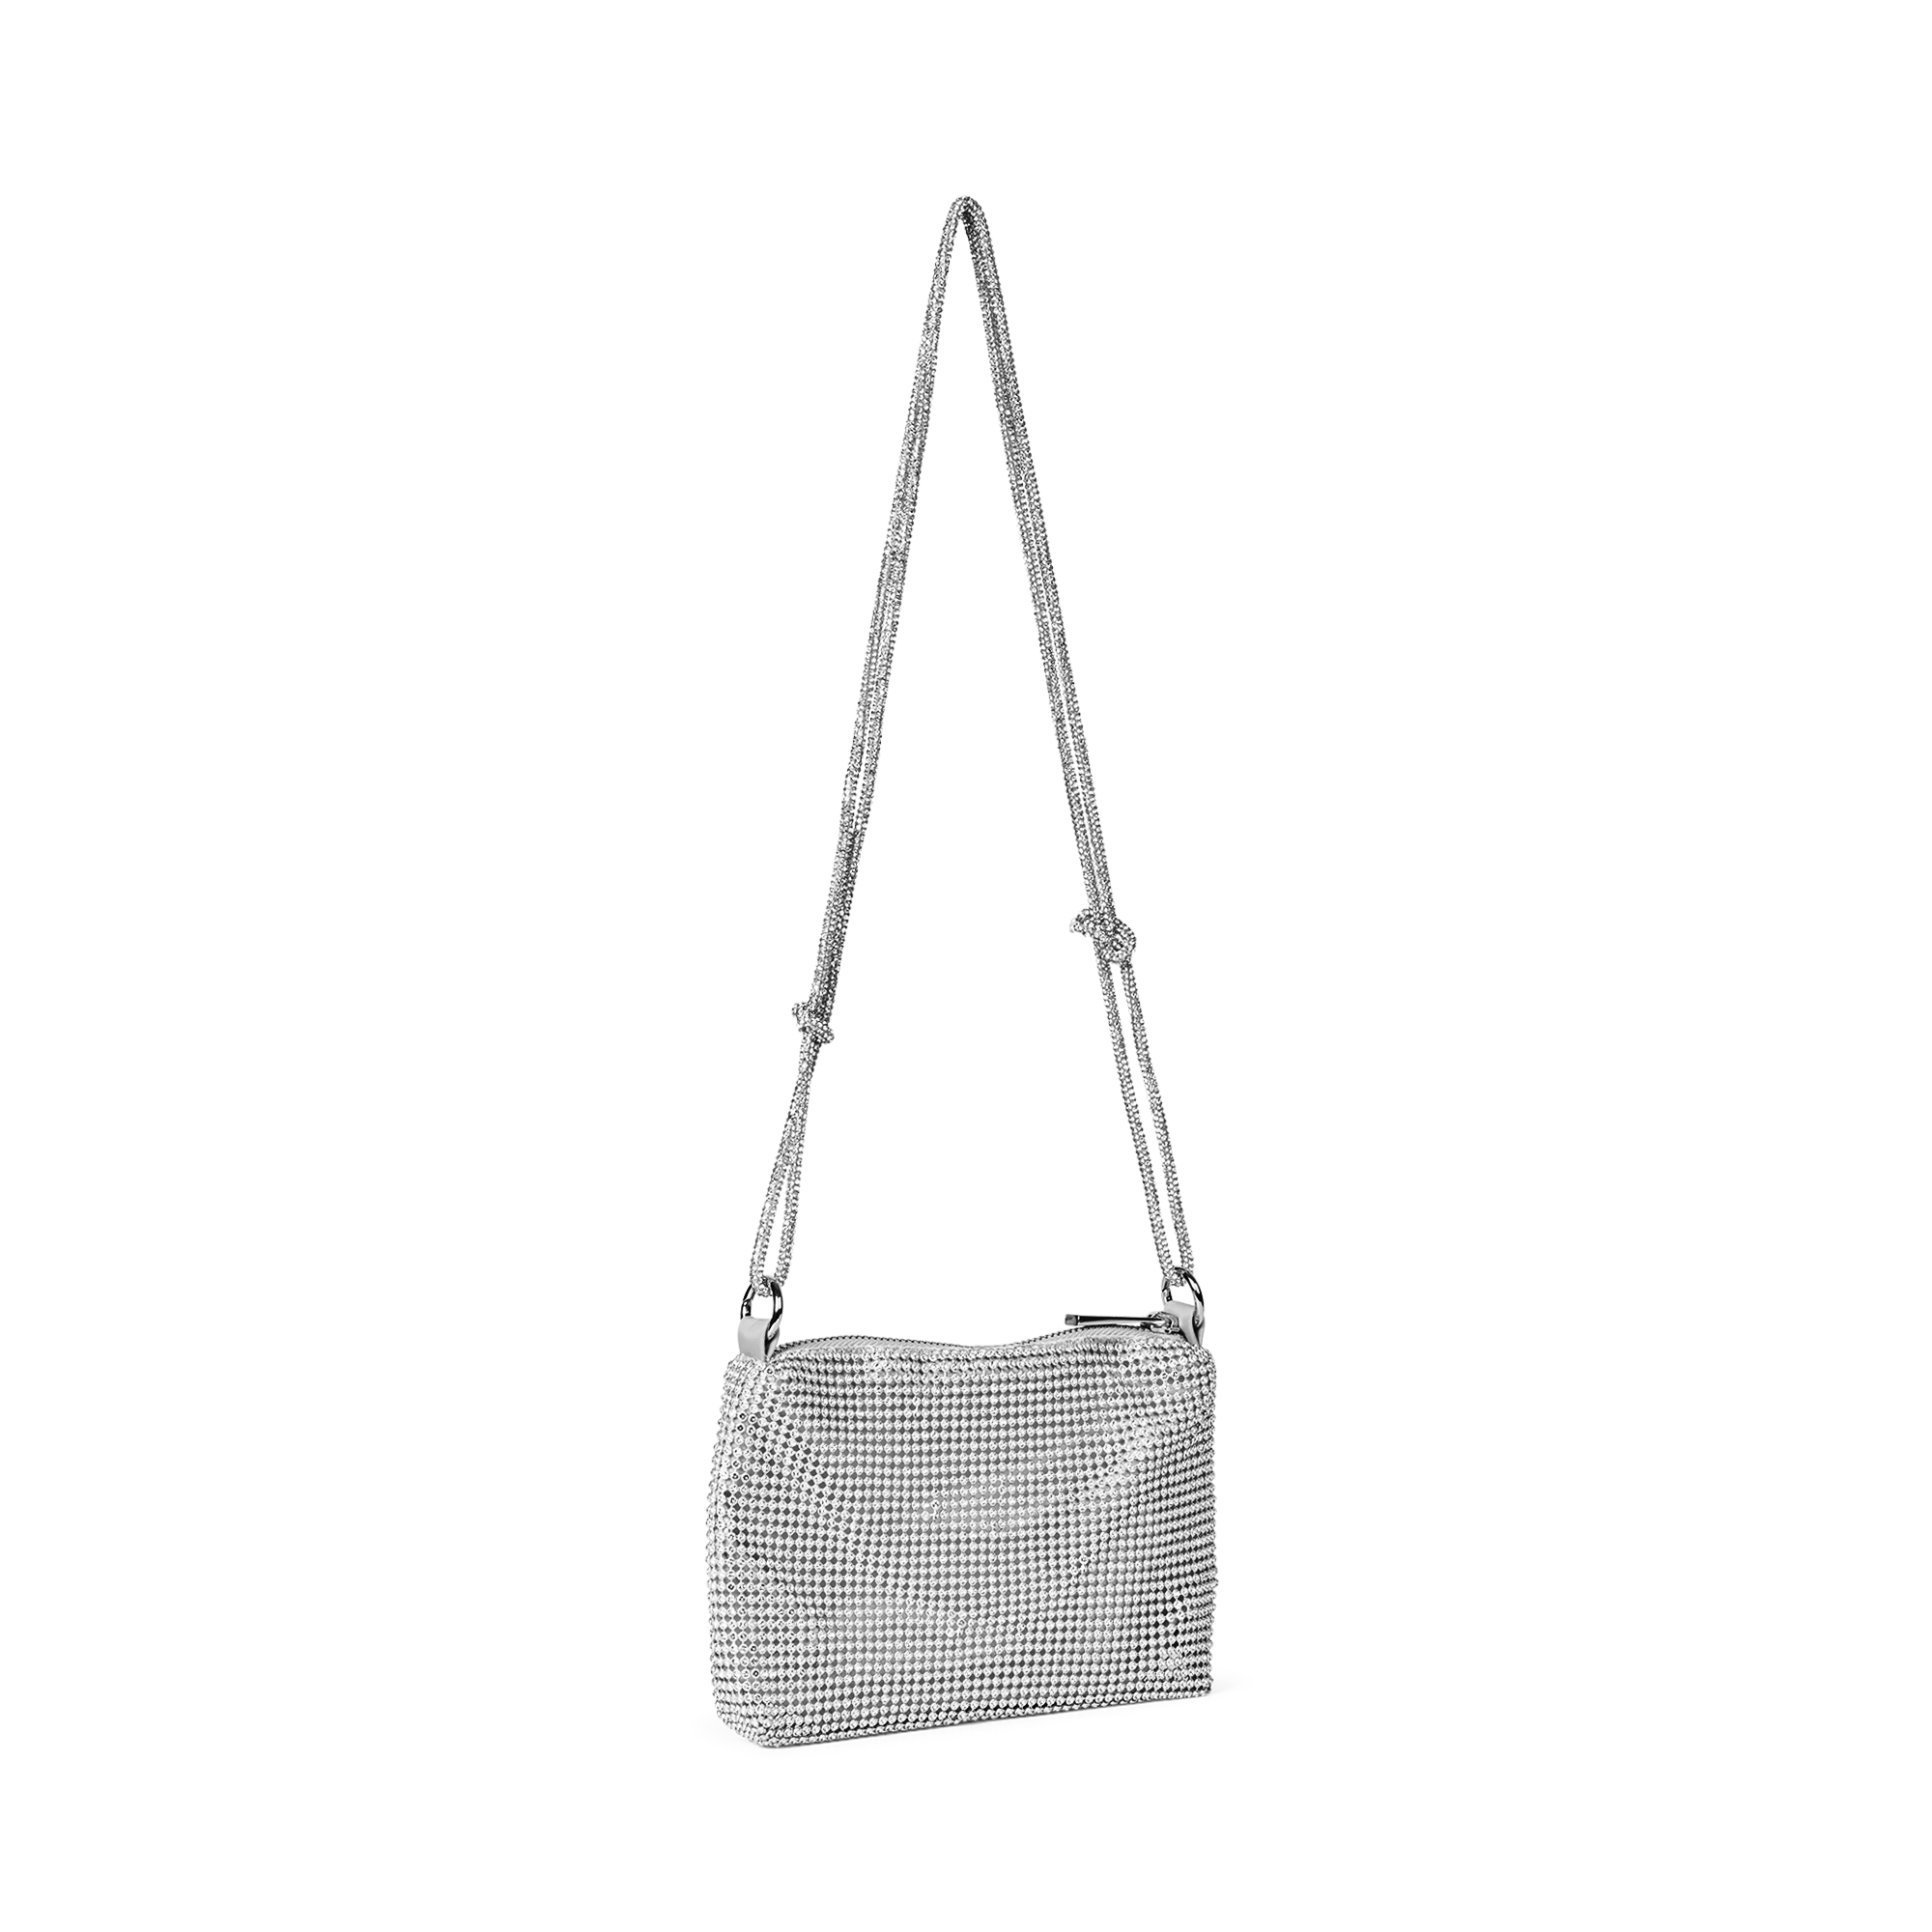 Day Party Night Purse - Silver